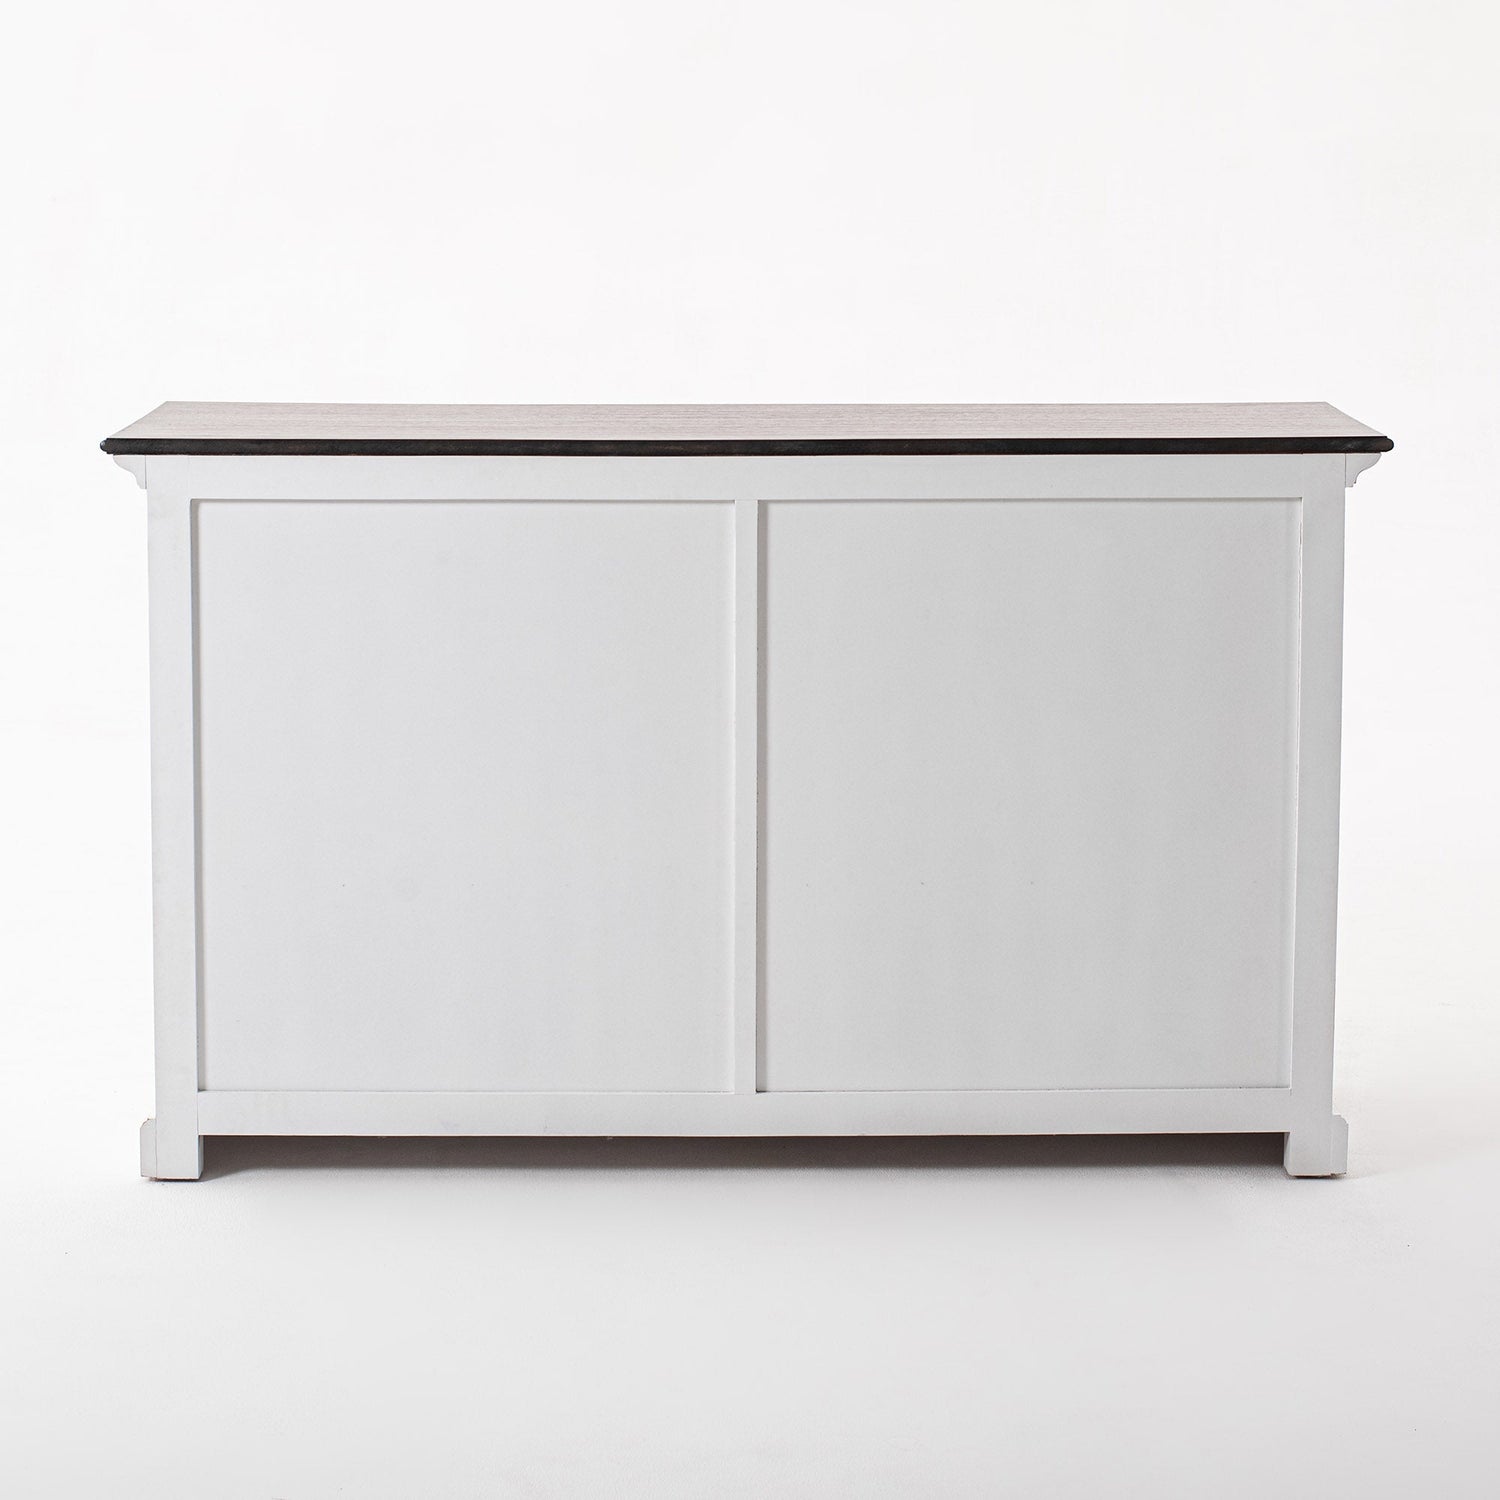 Halifax accent sideboard with 2 drawers